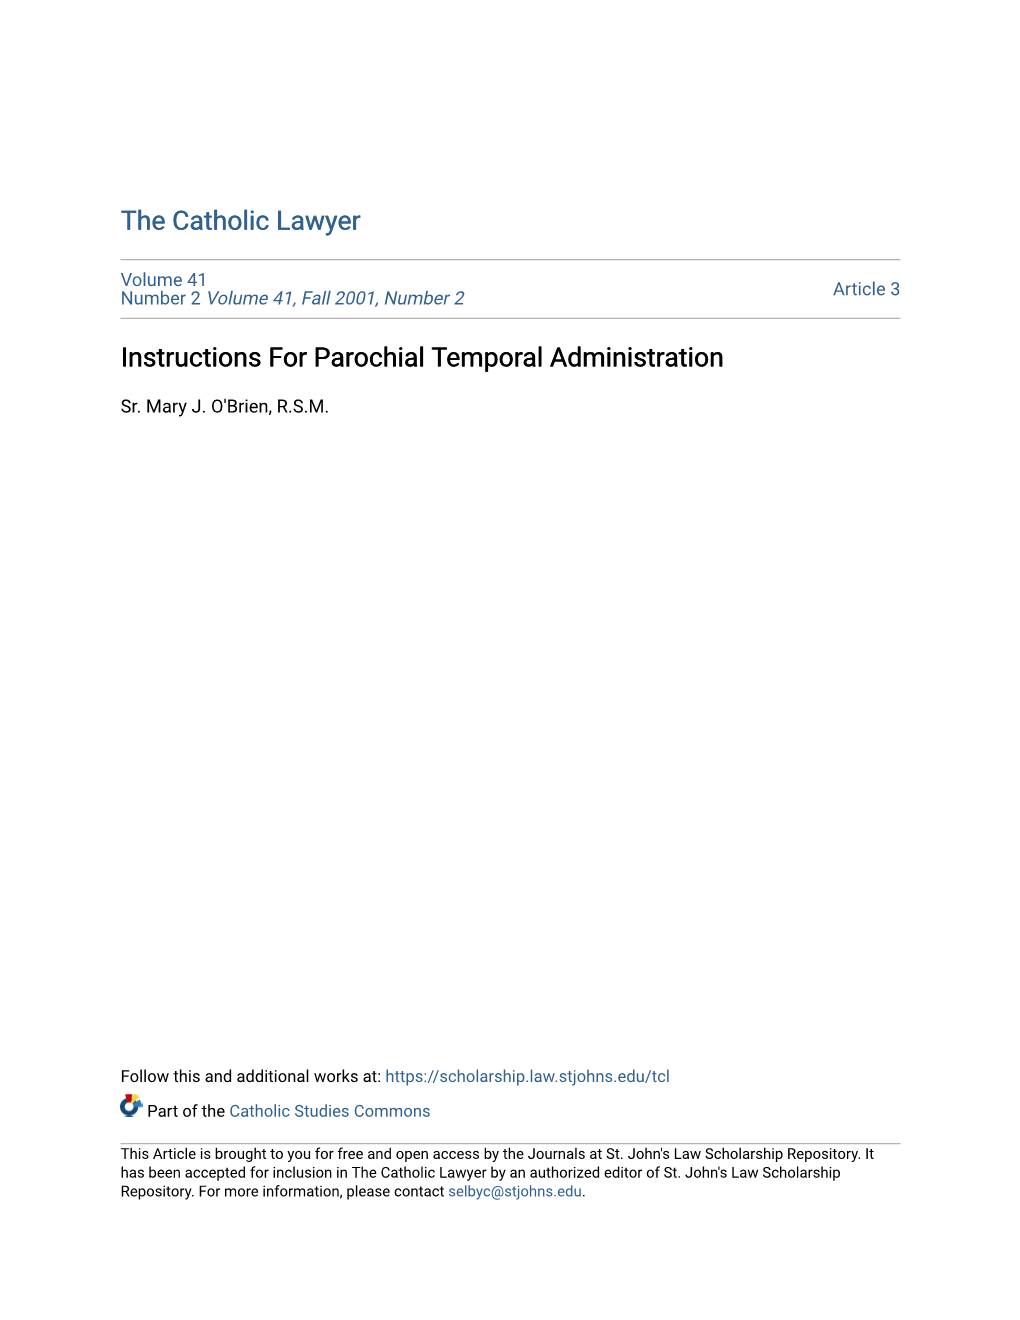 Instructions for Parochial Temporal Administration